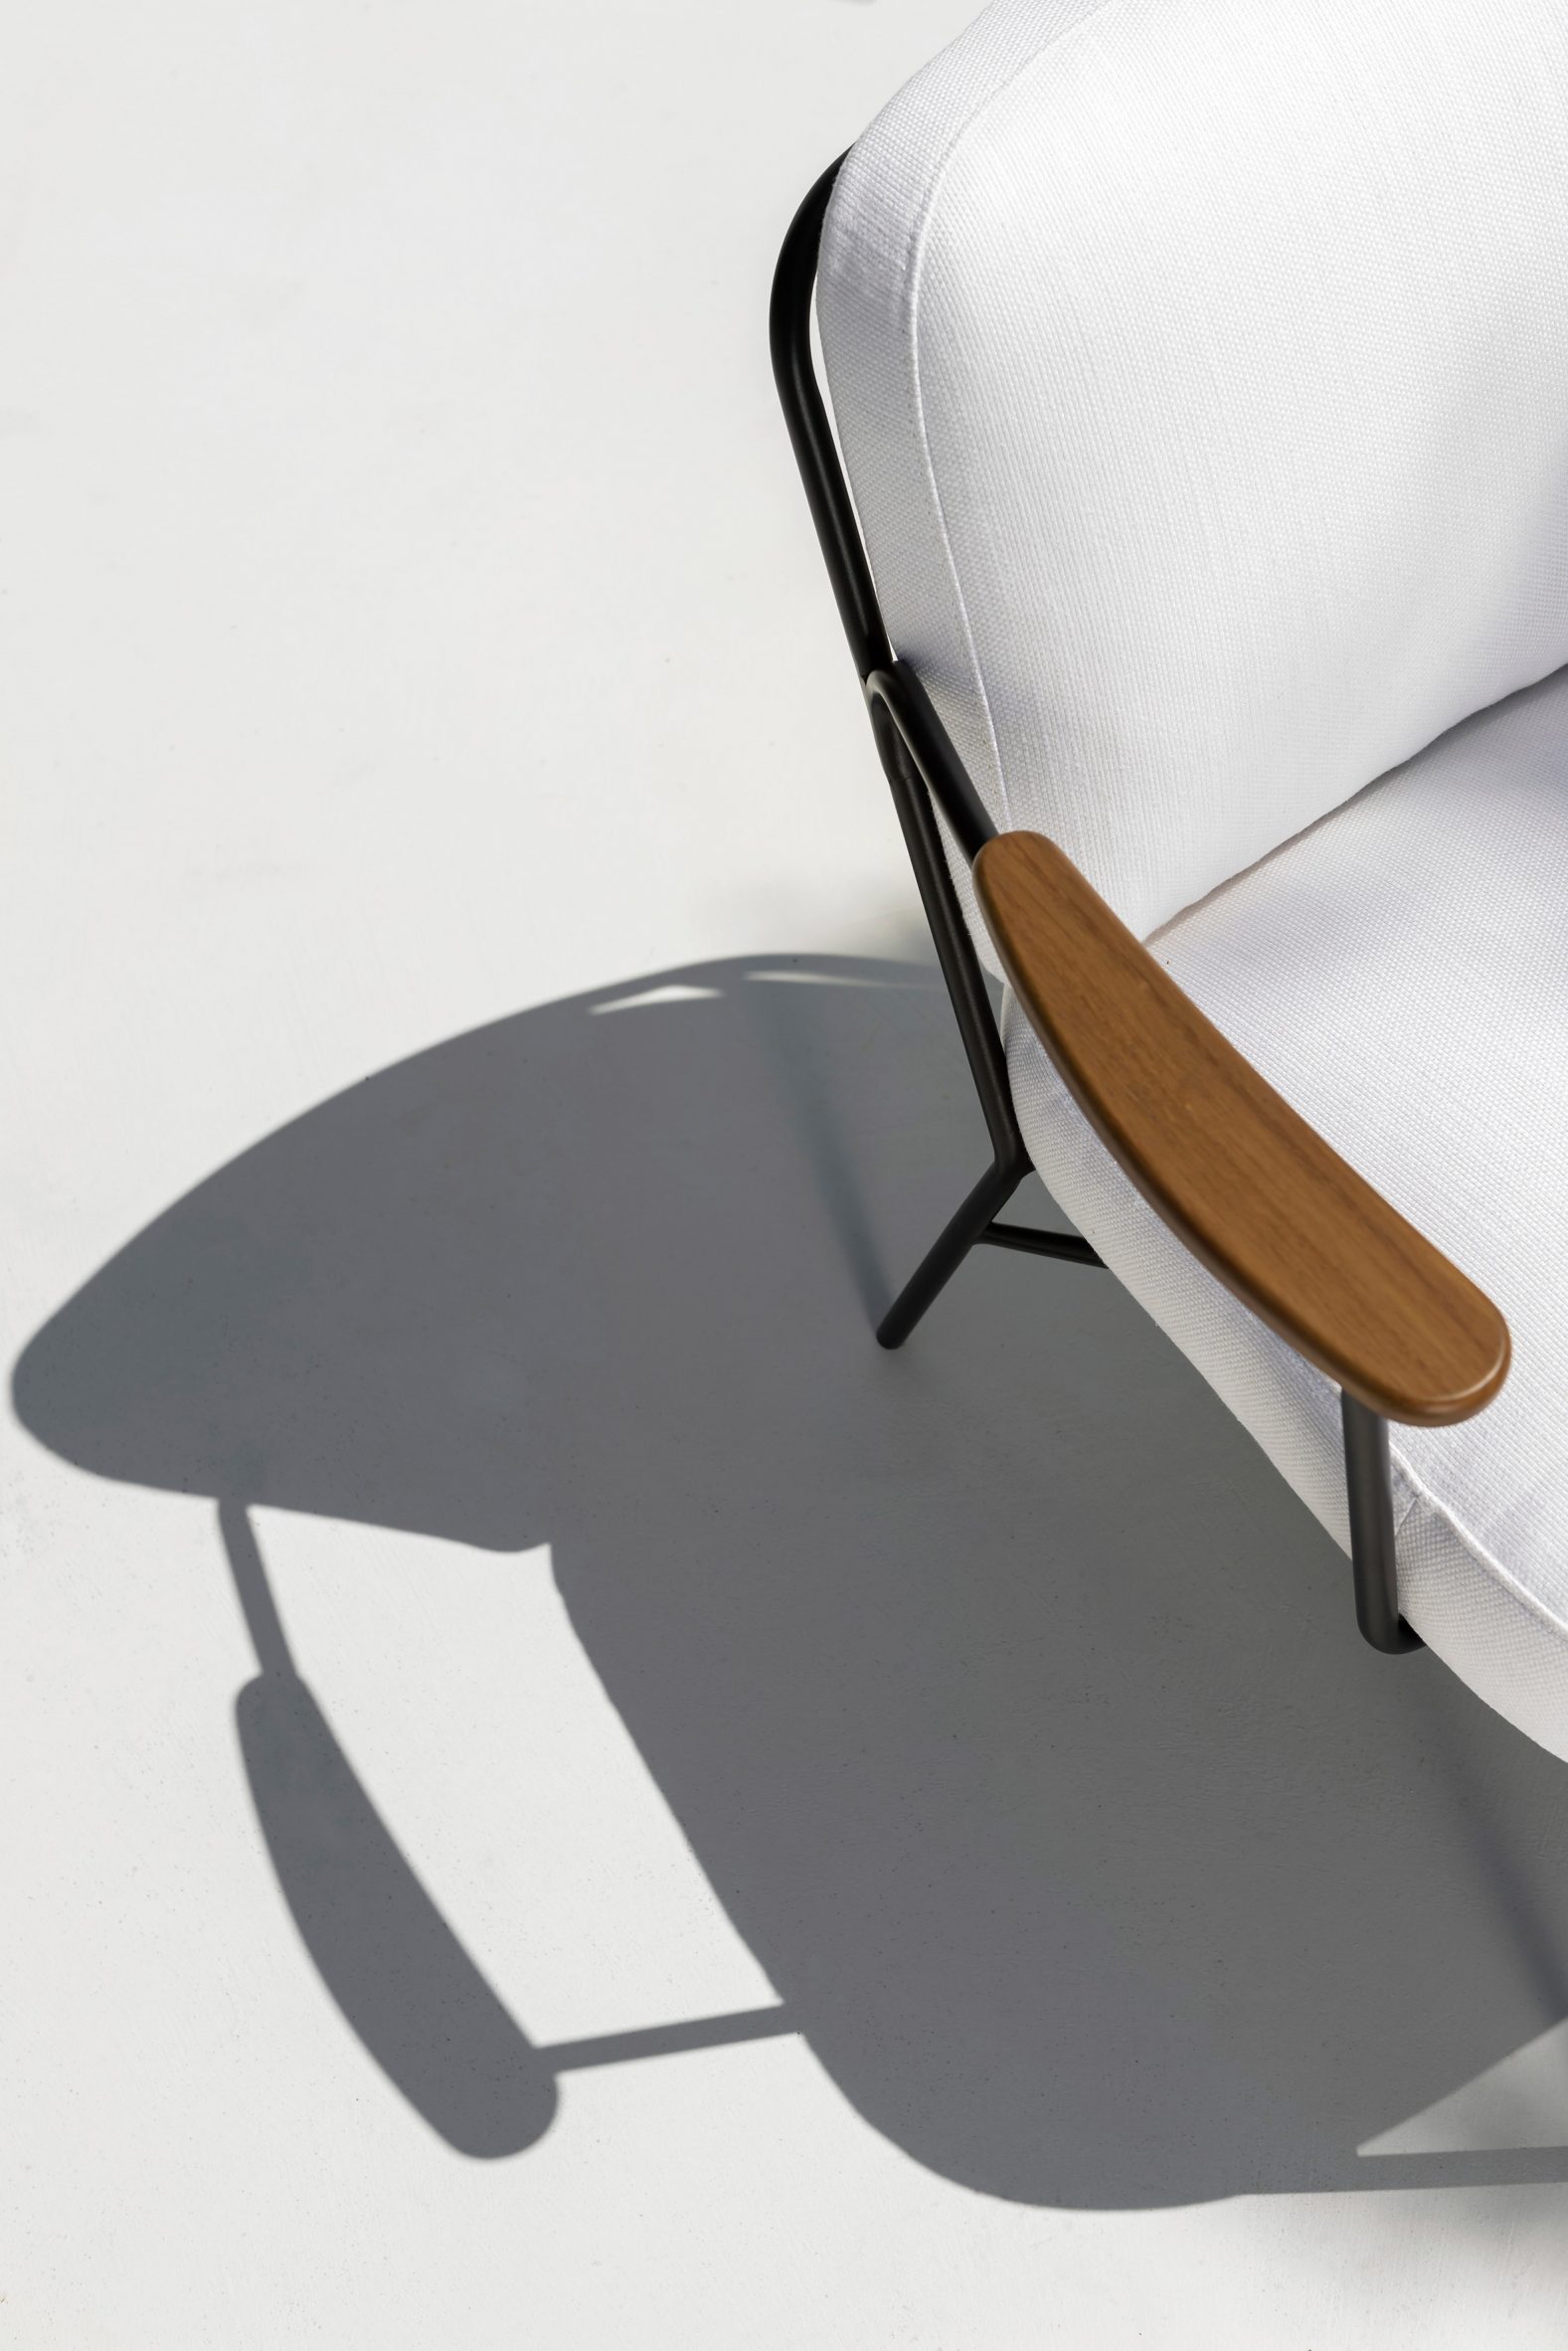 Palm armchair by Jean-Michel Wilmotte for Parla Design